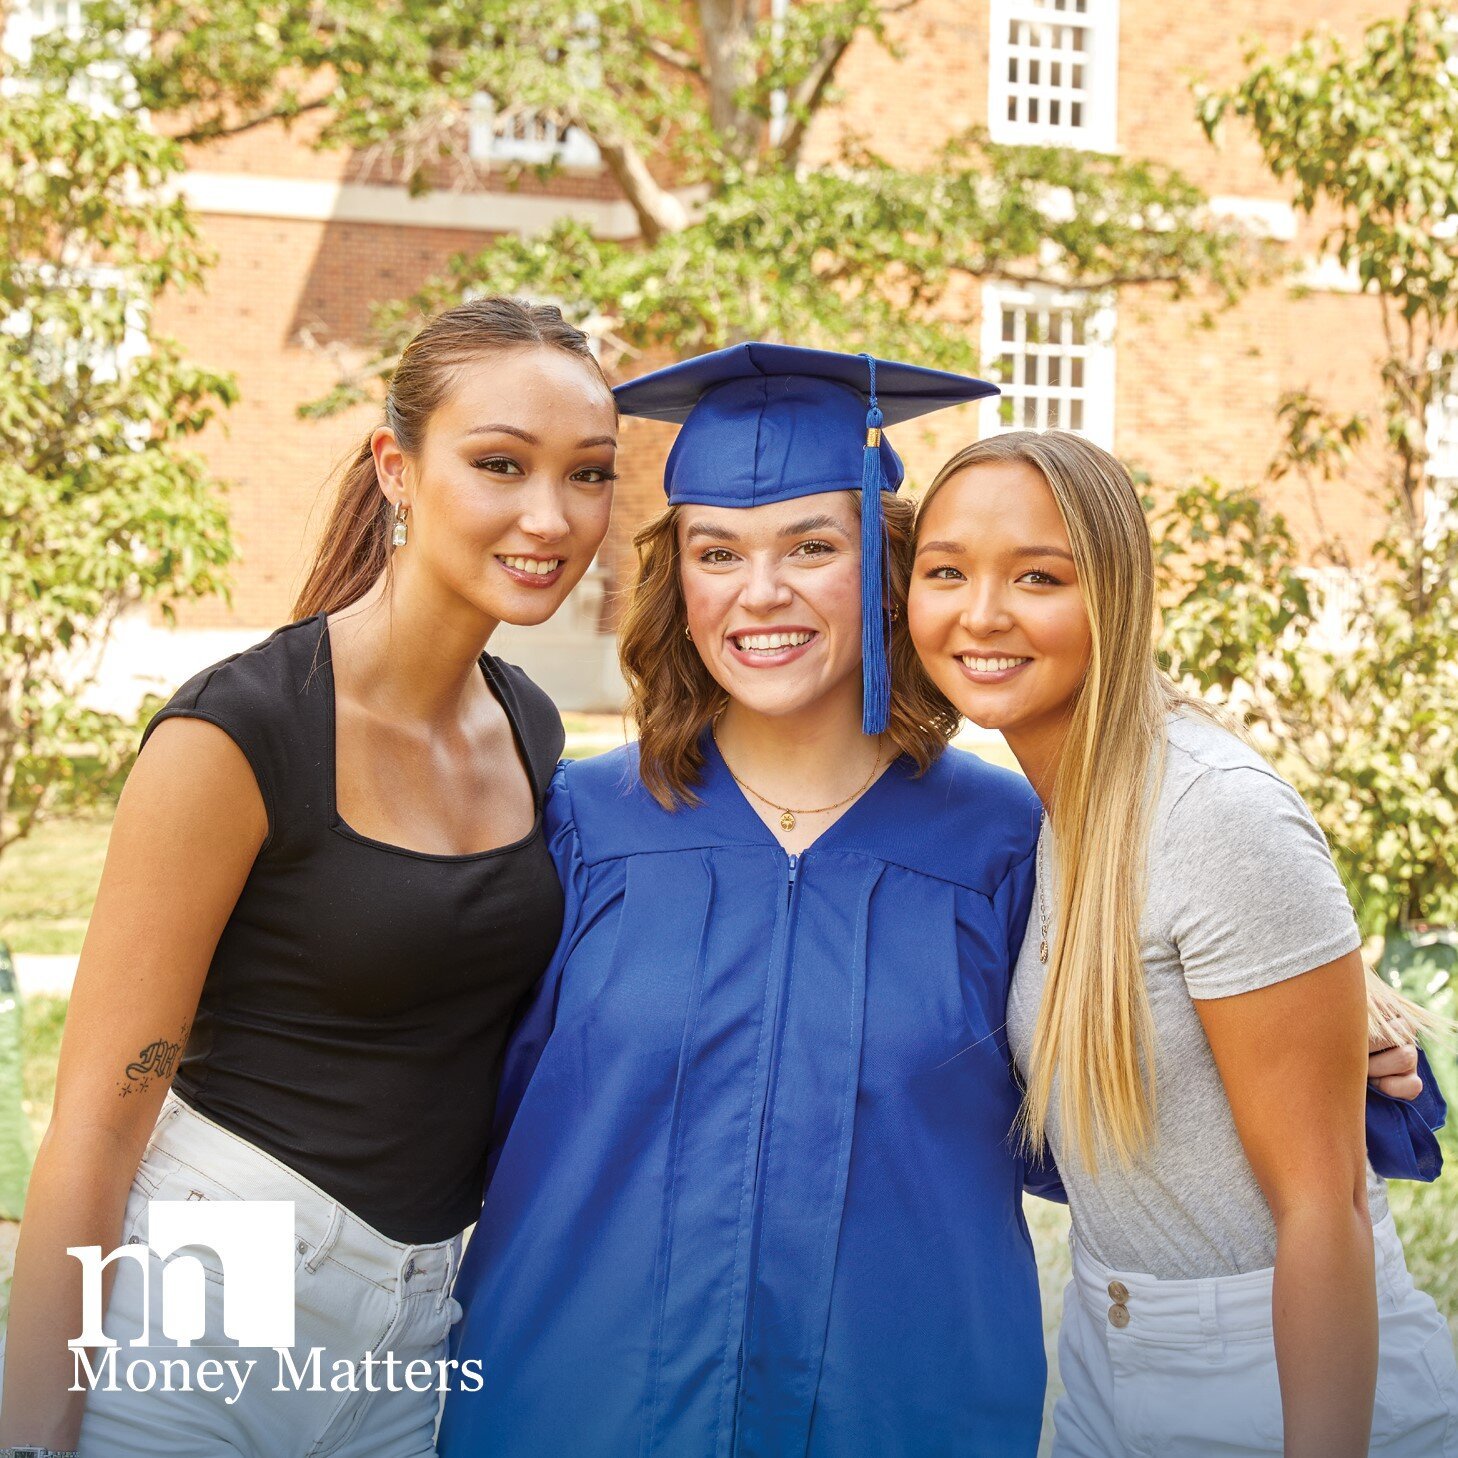 Two women pose with another woman wearing a graduation cap and gown.